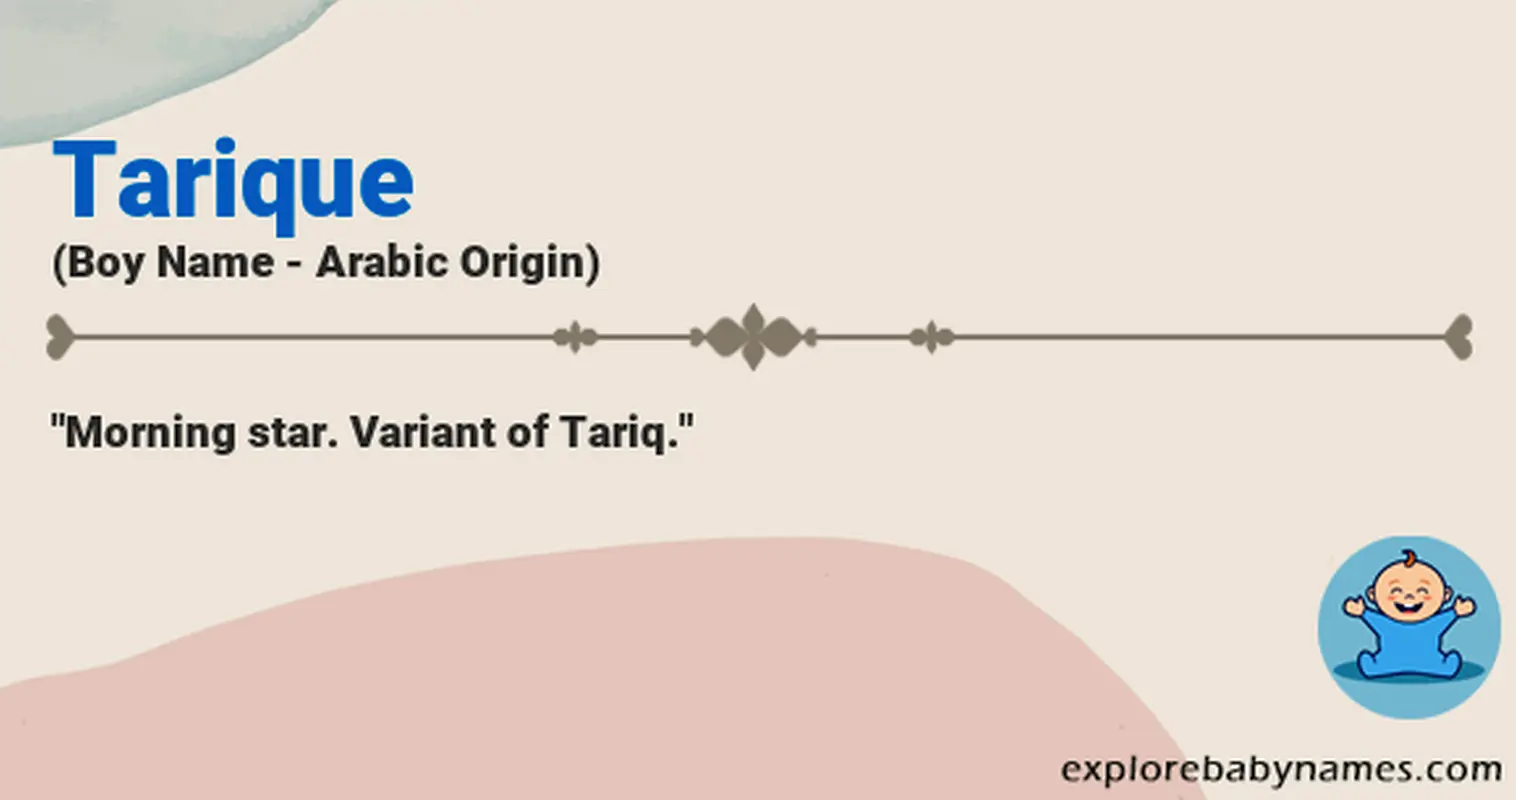 Meaning of Tarique